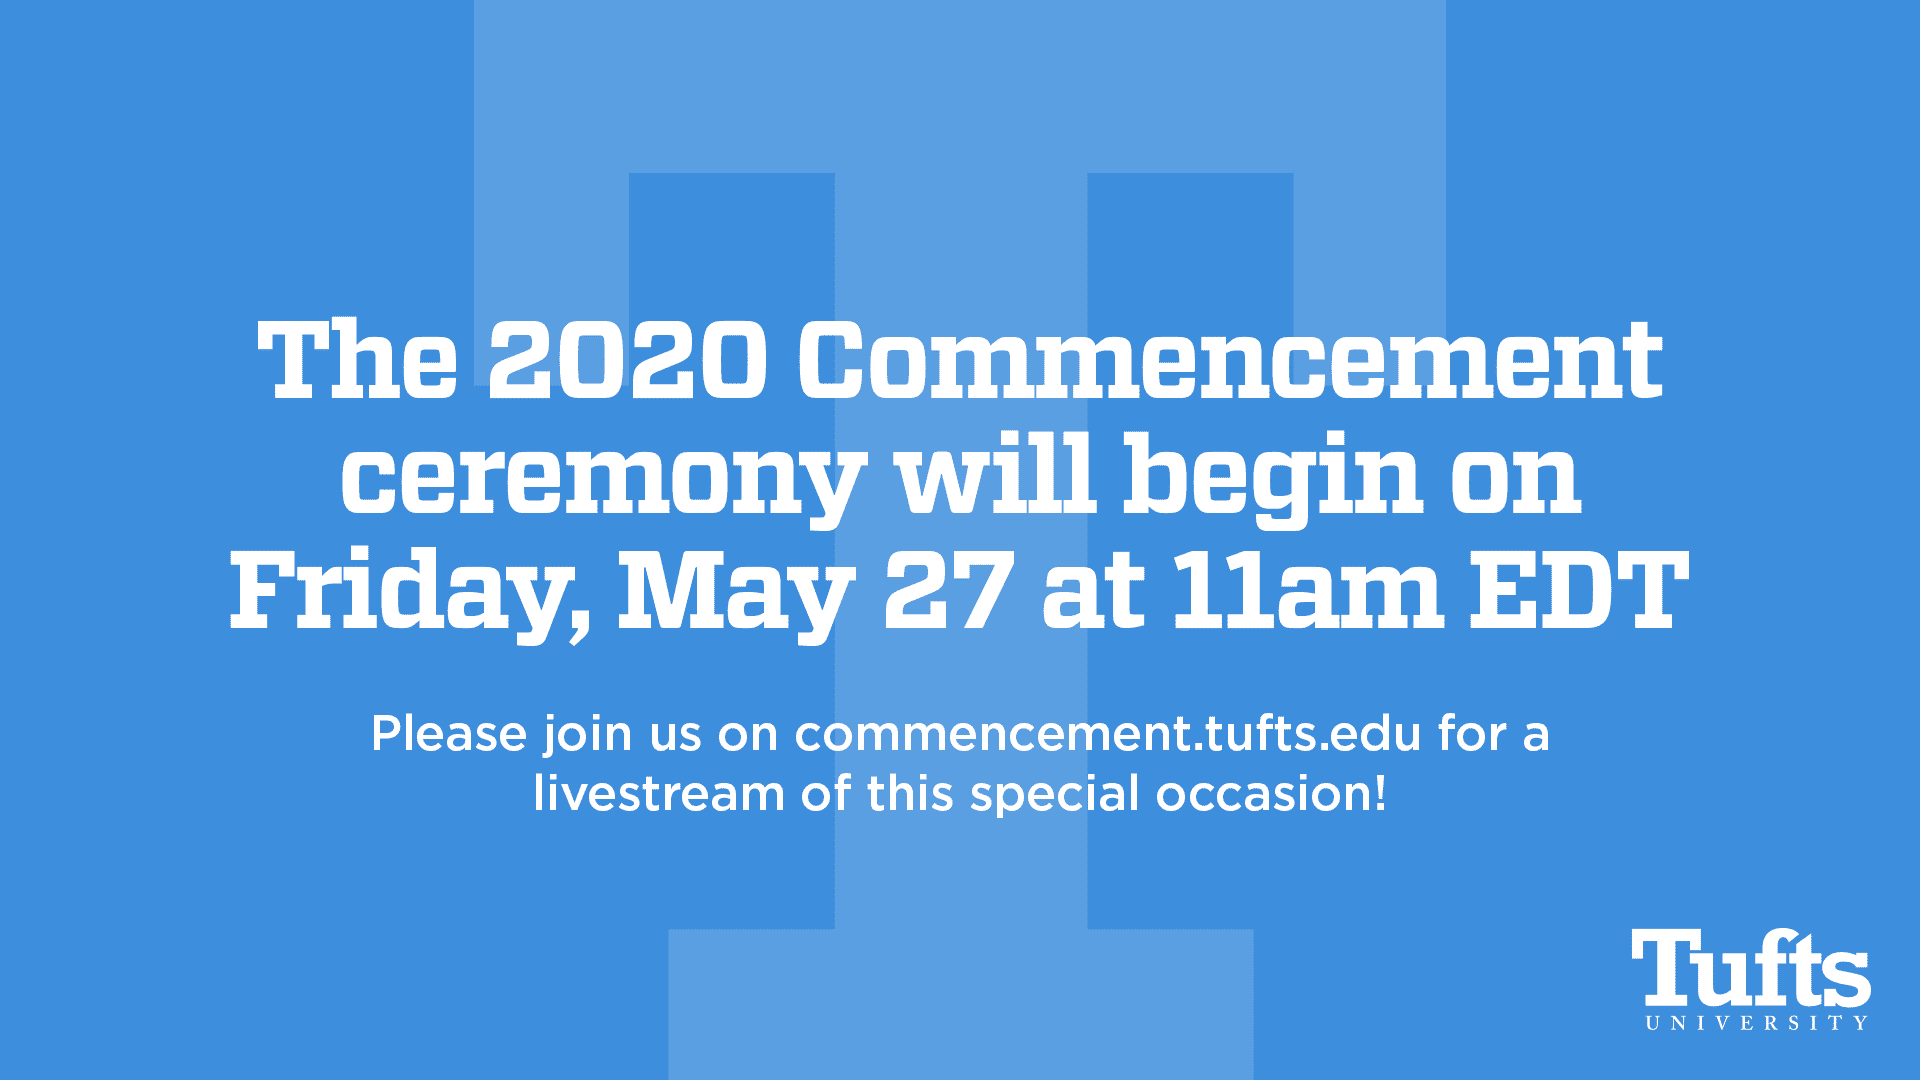 The 2020 Commencement ceremony will begin on Friday, May 27 at 11am EDT. Please join us on dev-tufts-commence.pantheonsite.io for a livestream of this special occasion!